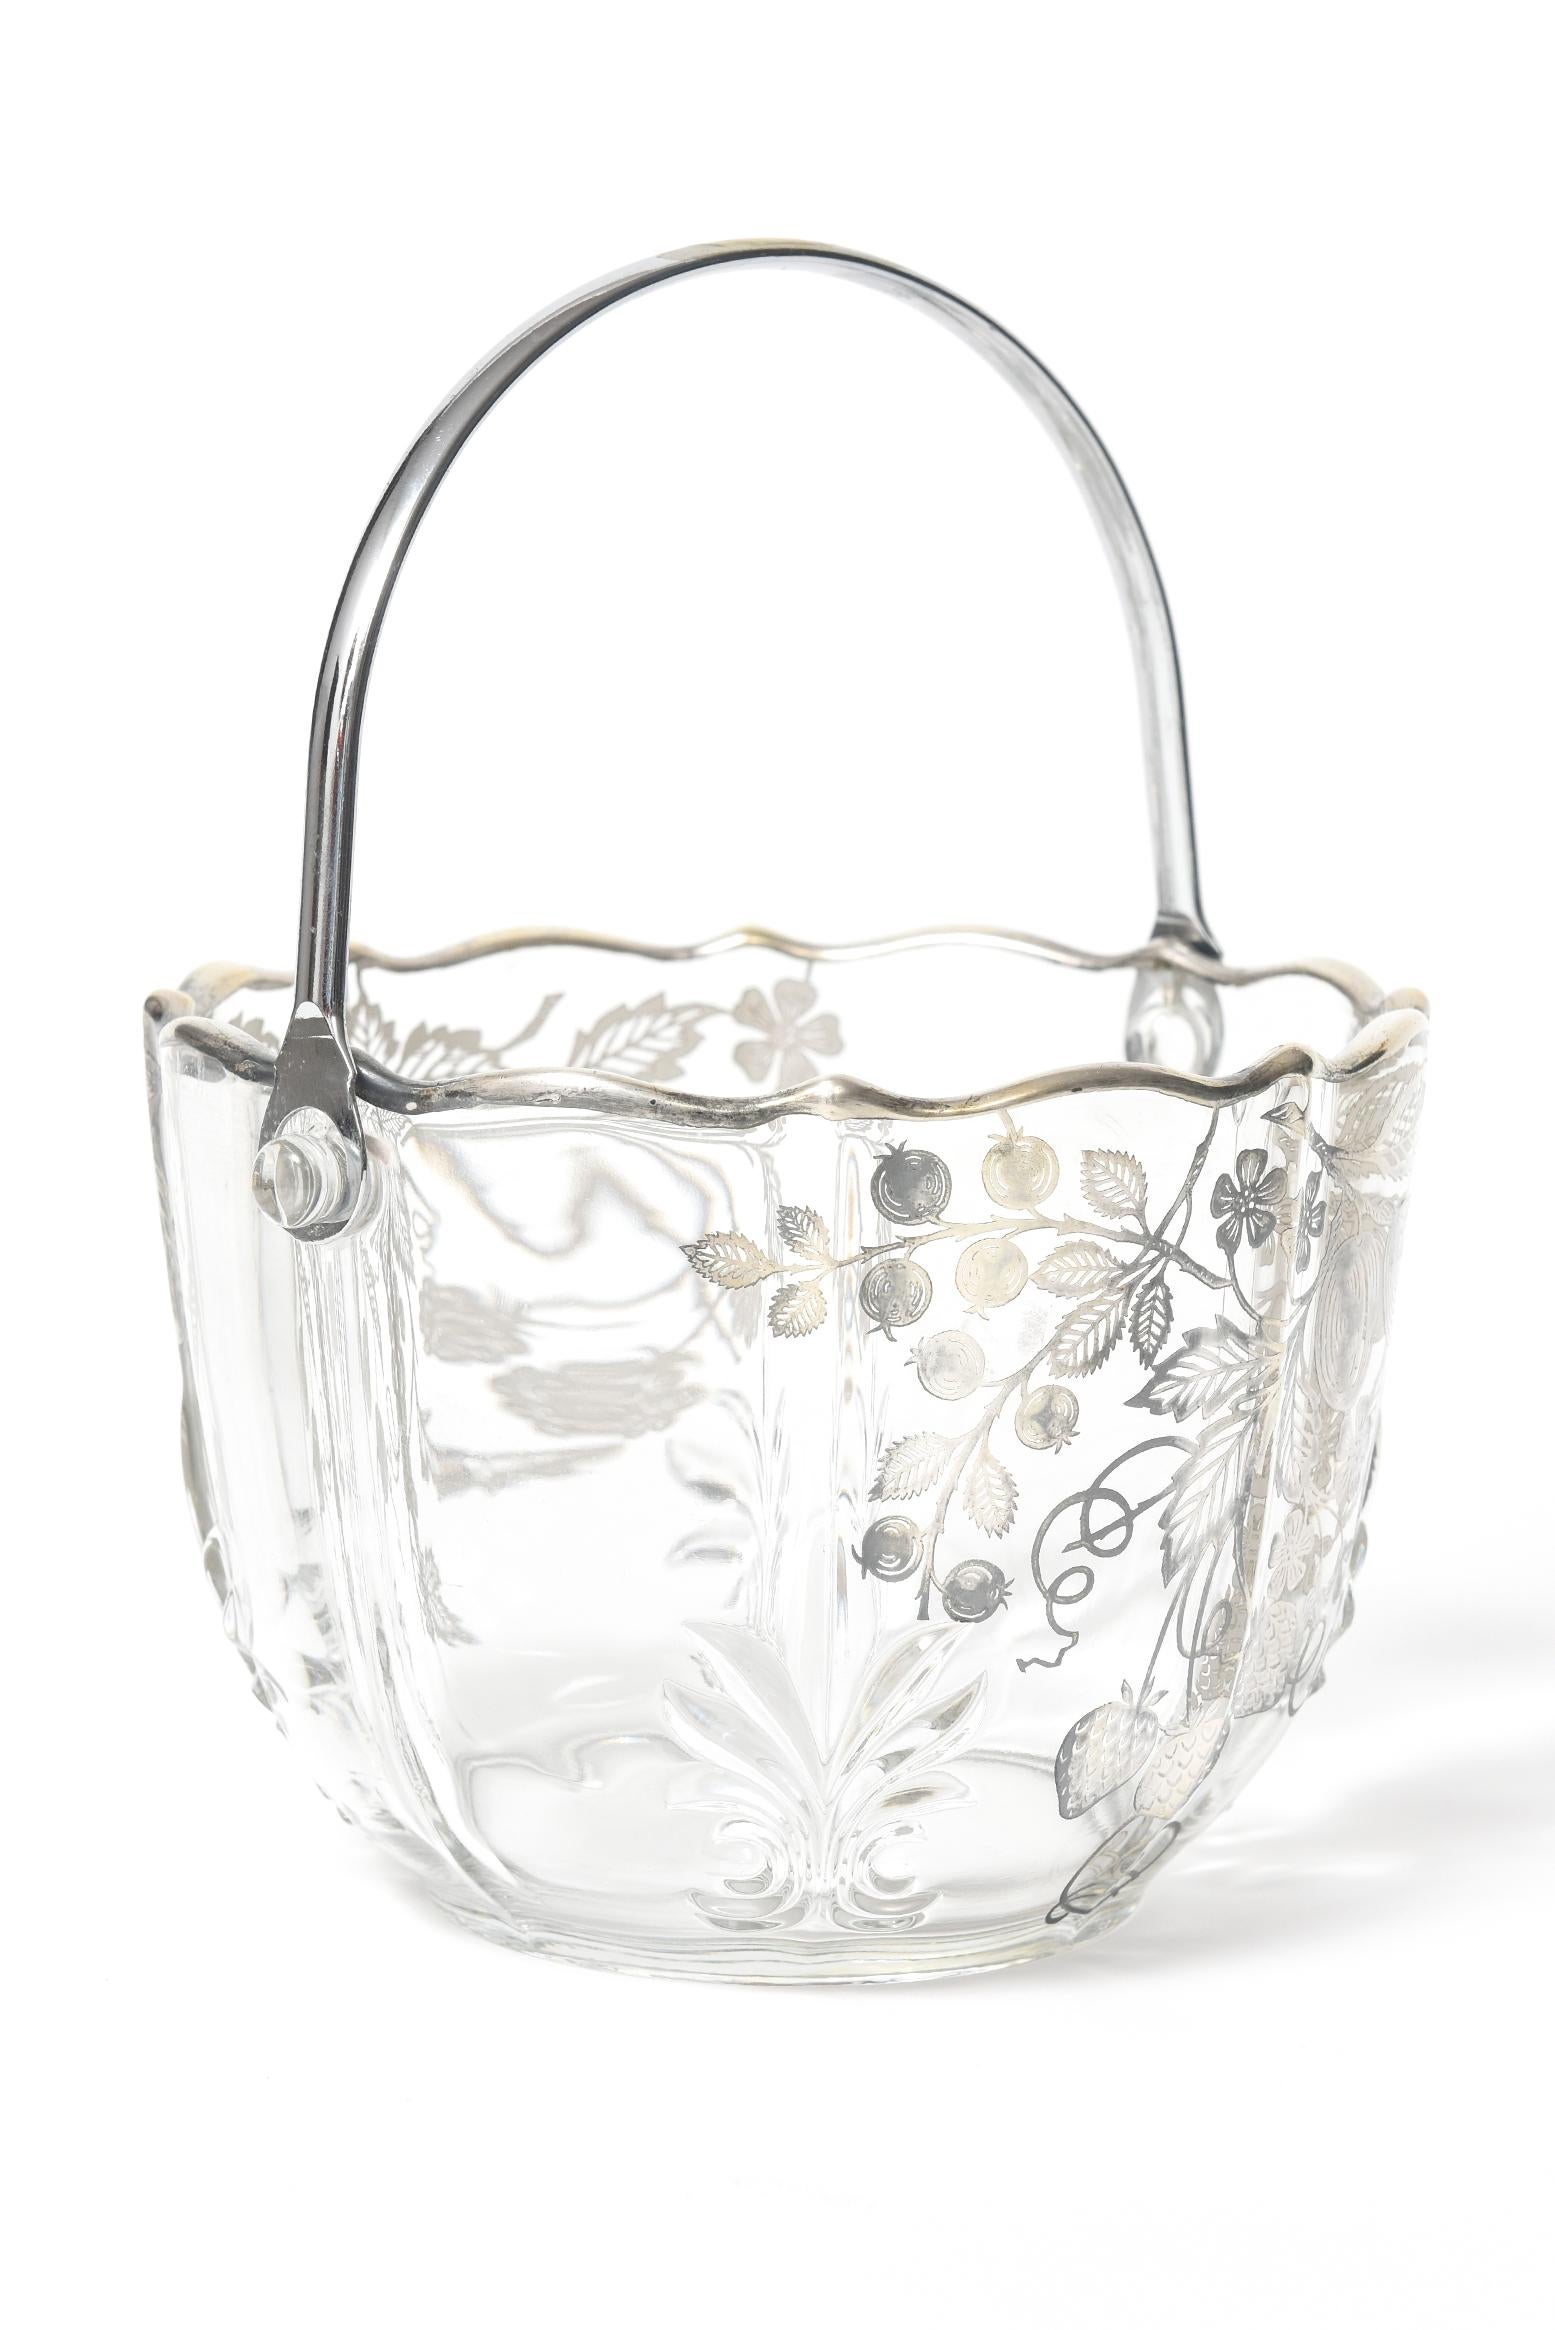 Sterling Silver Overlay Glass Fruit and Flower Basket Bowl Ice Bucket For Sale 2